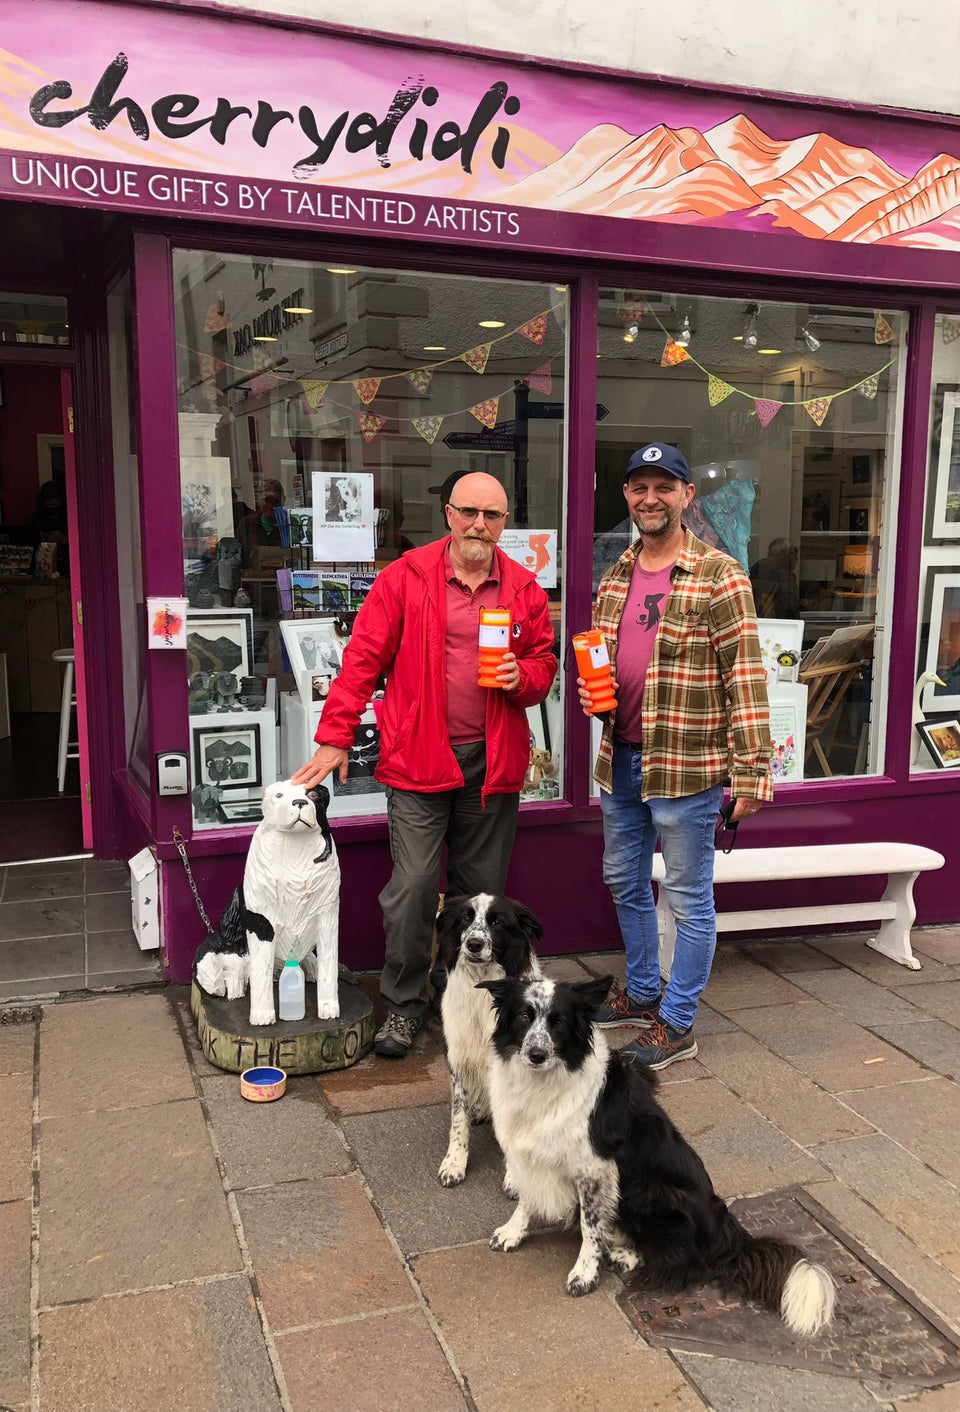 Ben Wilkes from the Border Collie Trust at Cherrydidi in 2021 collecting 2173.52